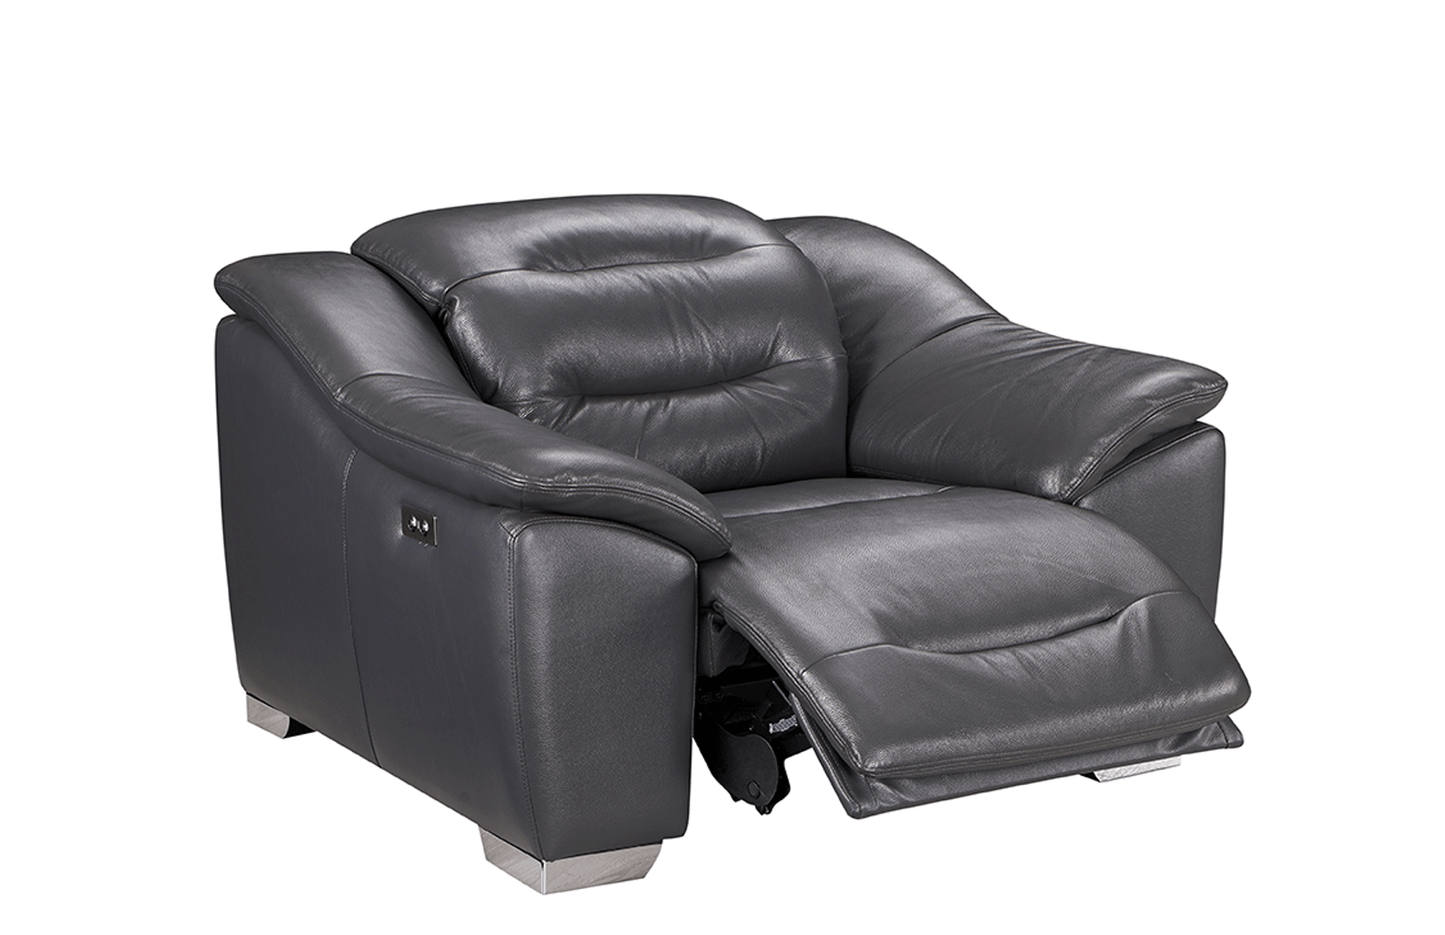 972 with 2 Electric Recliners